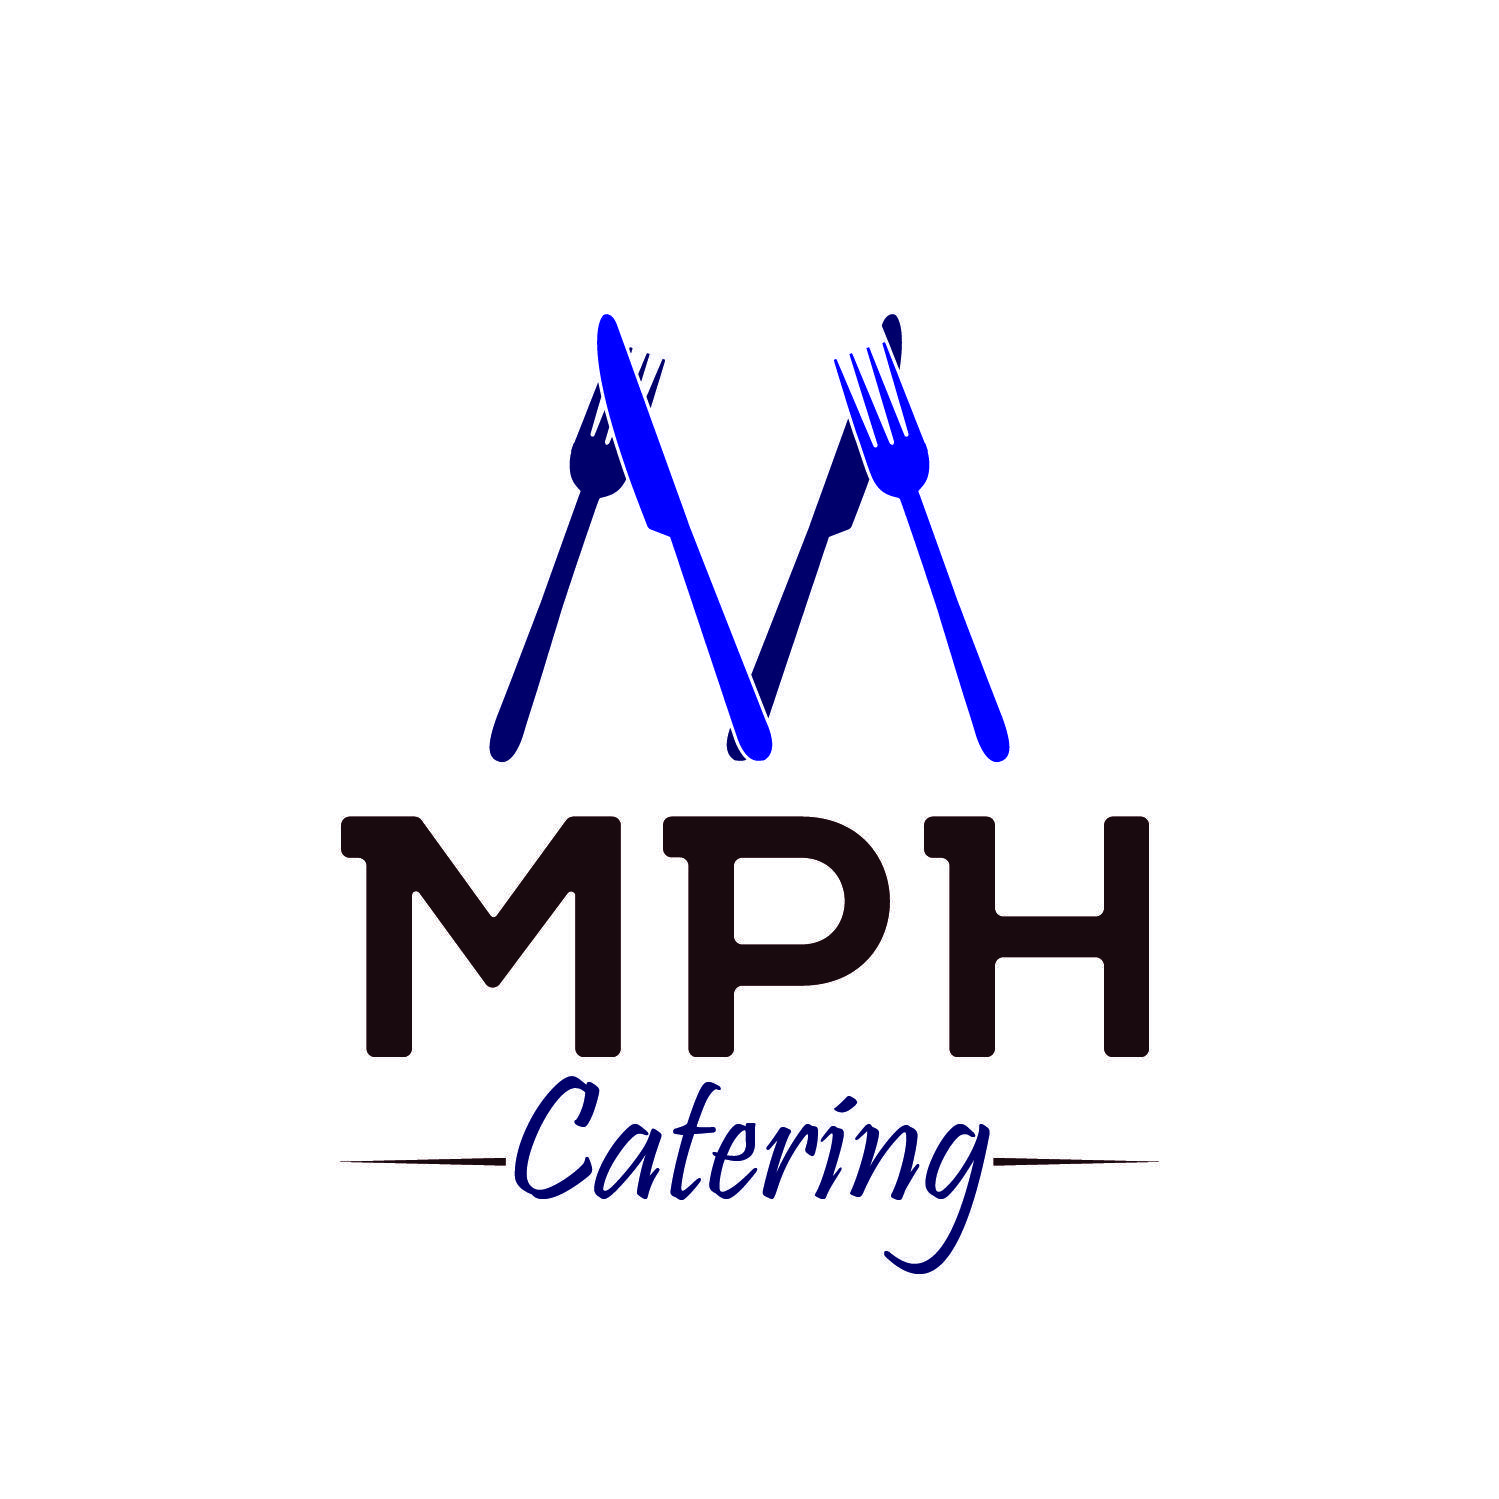 Mph Logo - Catering Logo Design for MPH Catering by Ross_Creates. Design